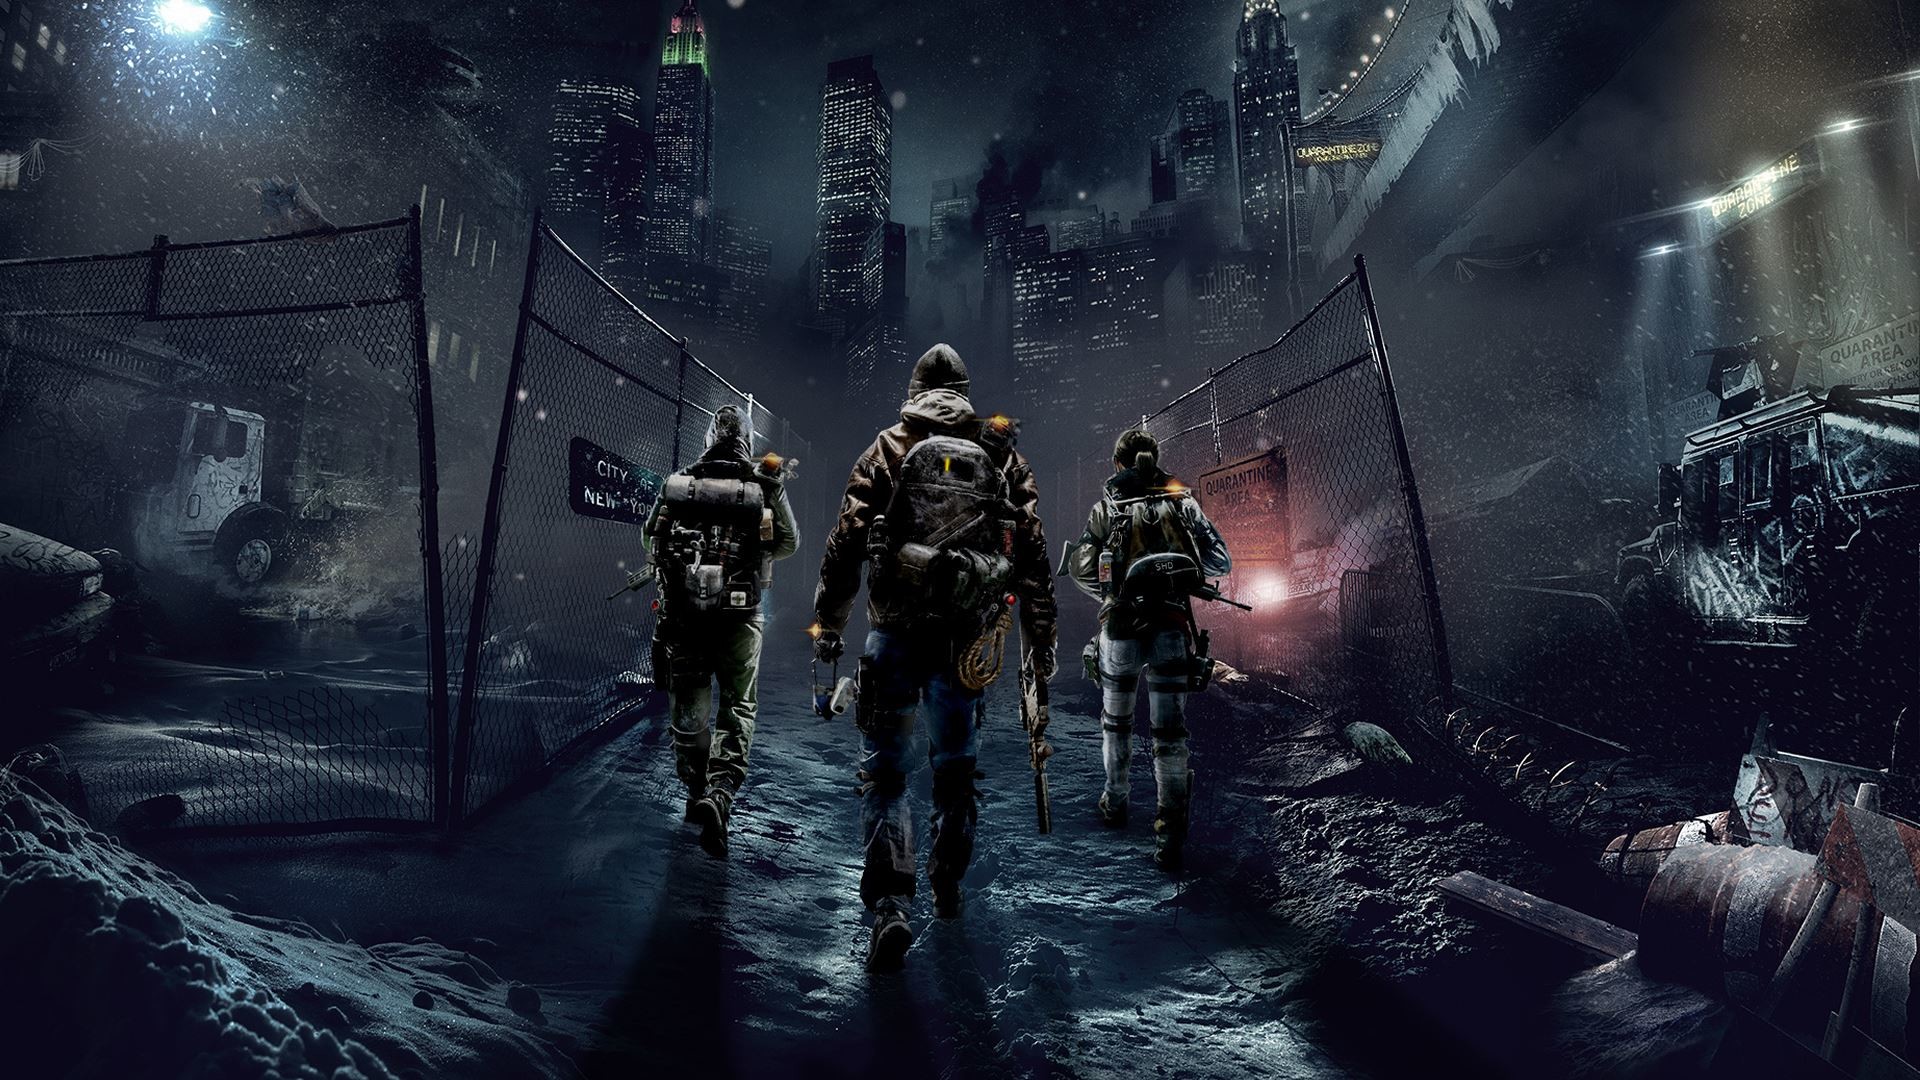 1920x1080 The Division Wallpaper For Pinterest The Division Wallpaper For Wall